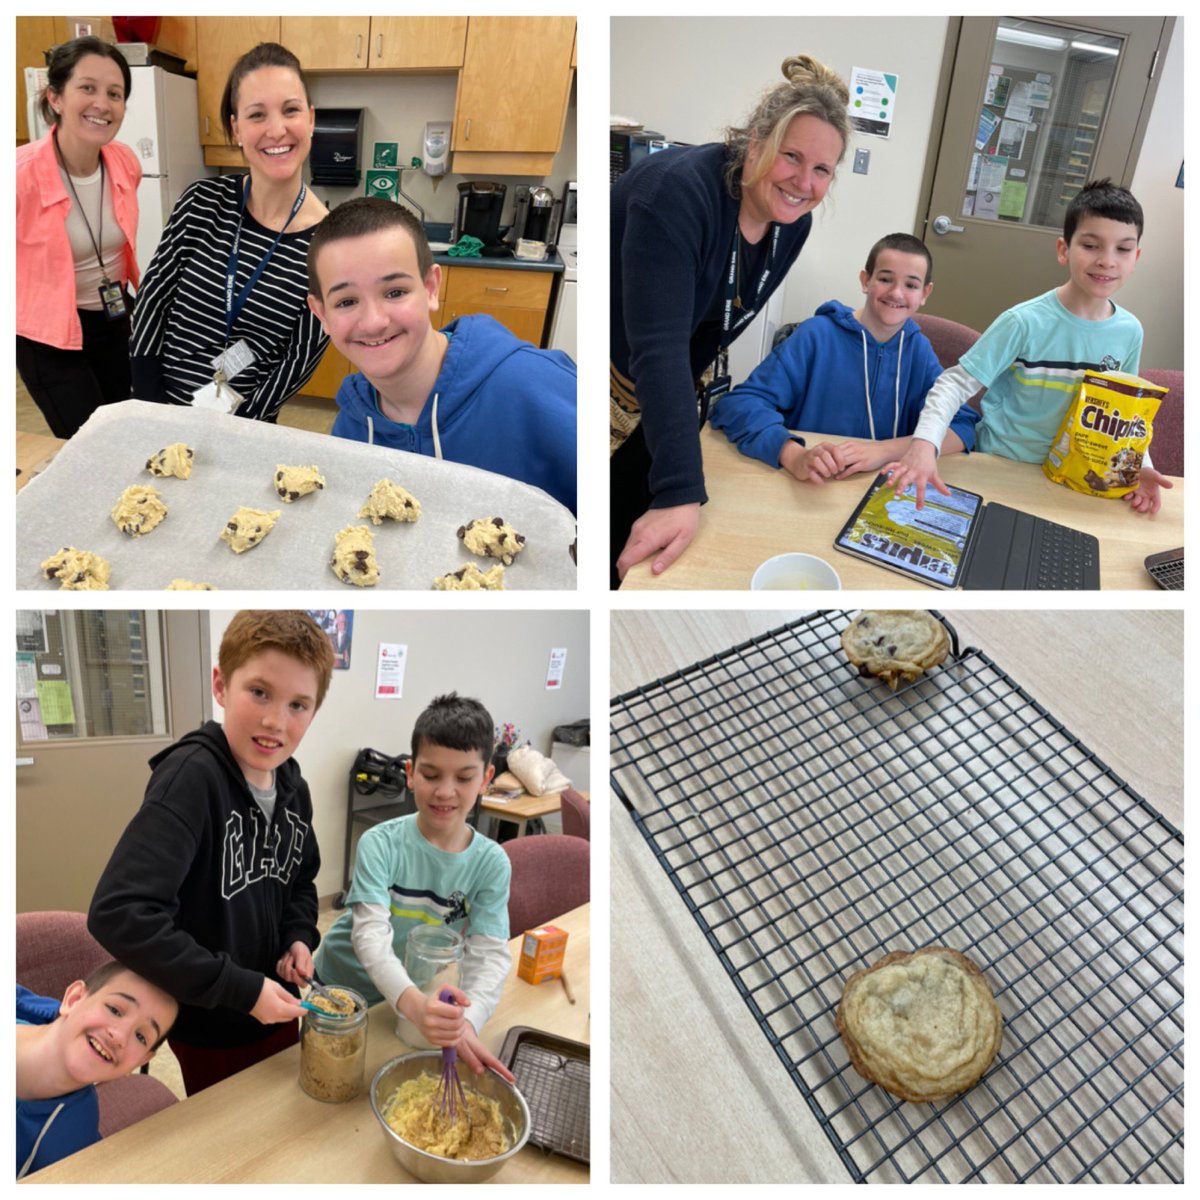 Pallies + AppleProject learning - the iPad spoke the recipe to us, we could draw to check which steps we completed, we used a timer and we enjoyed a treat we made with each other (gf cookies, bc our pallies with allergies matter!) 😍🍪💻 @l__sheppard @MLaPeareGEDSB @GEDSB